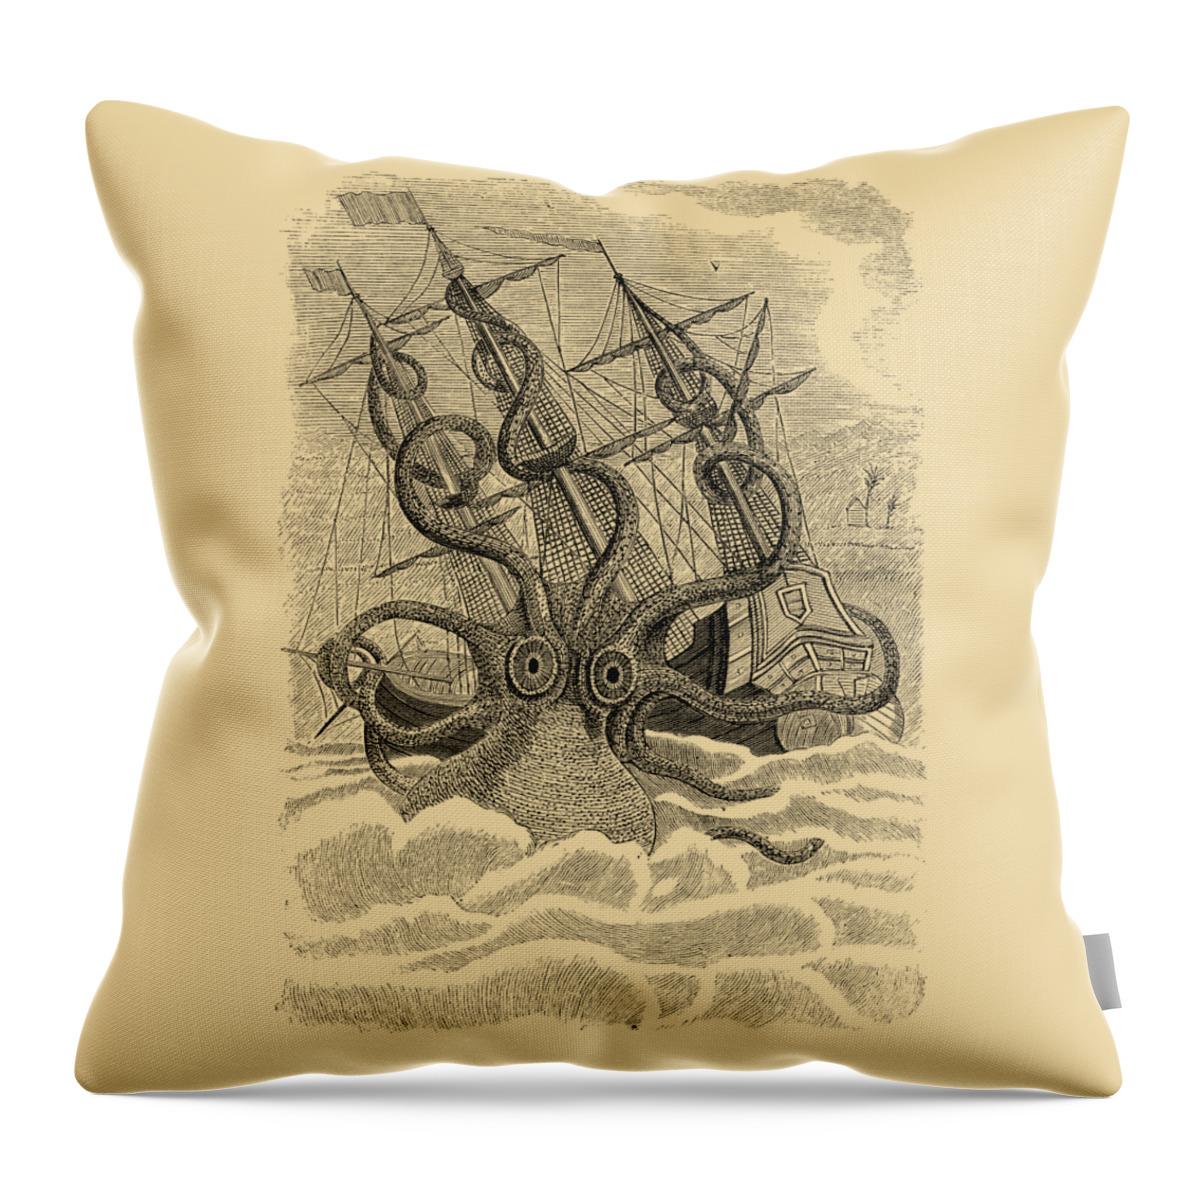 Kraken Throw Pillow featuring the digital art Sea Monster And Sinking Ship by Madame Memento